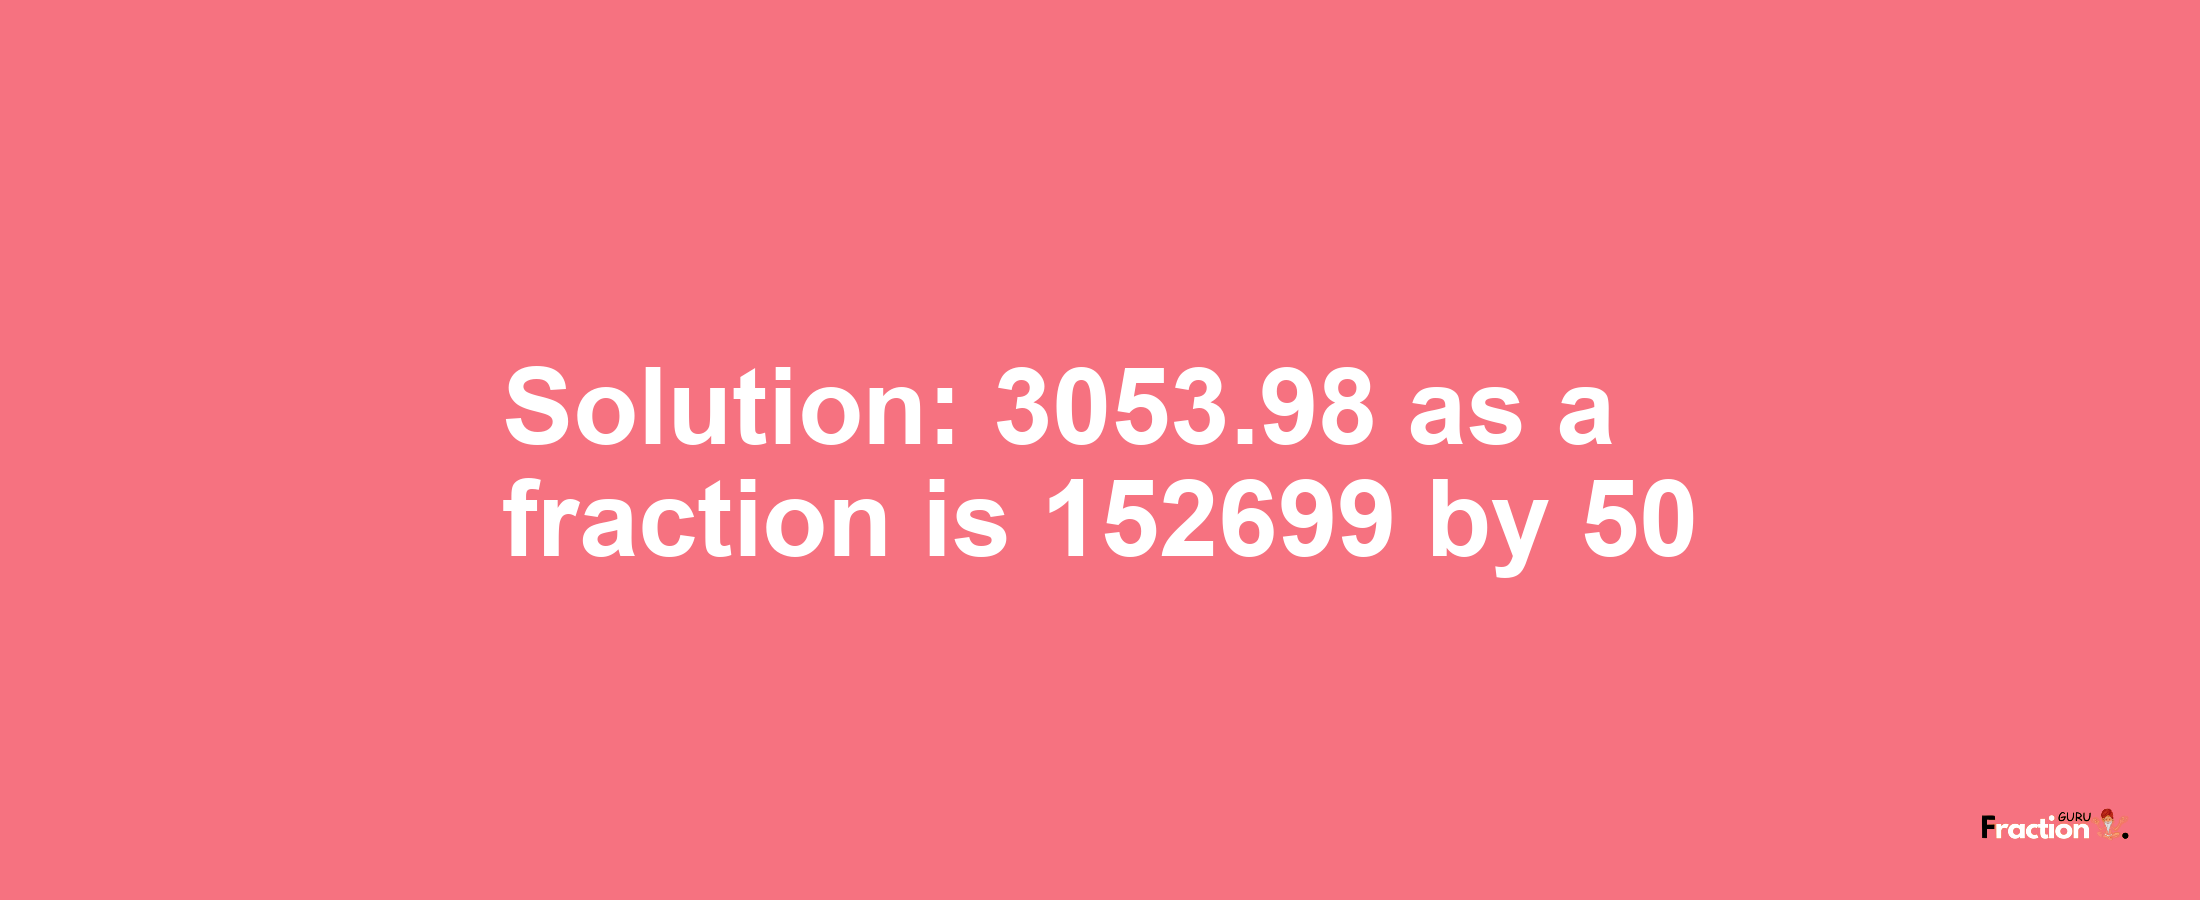 Solution:3053.98 as a fraction is 152699/50